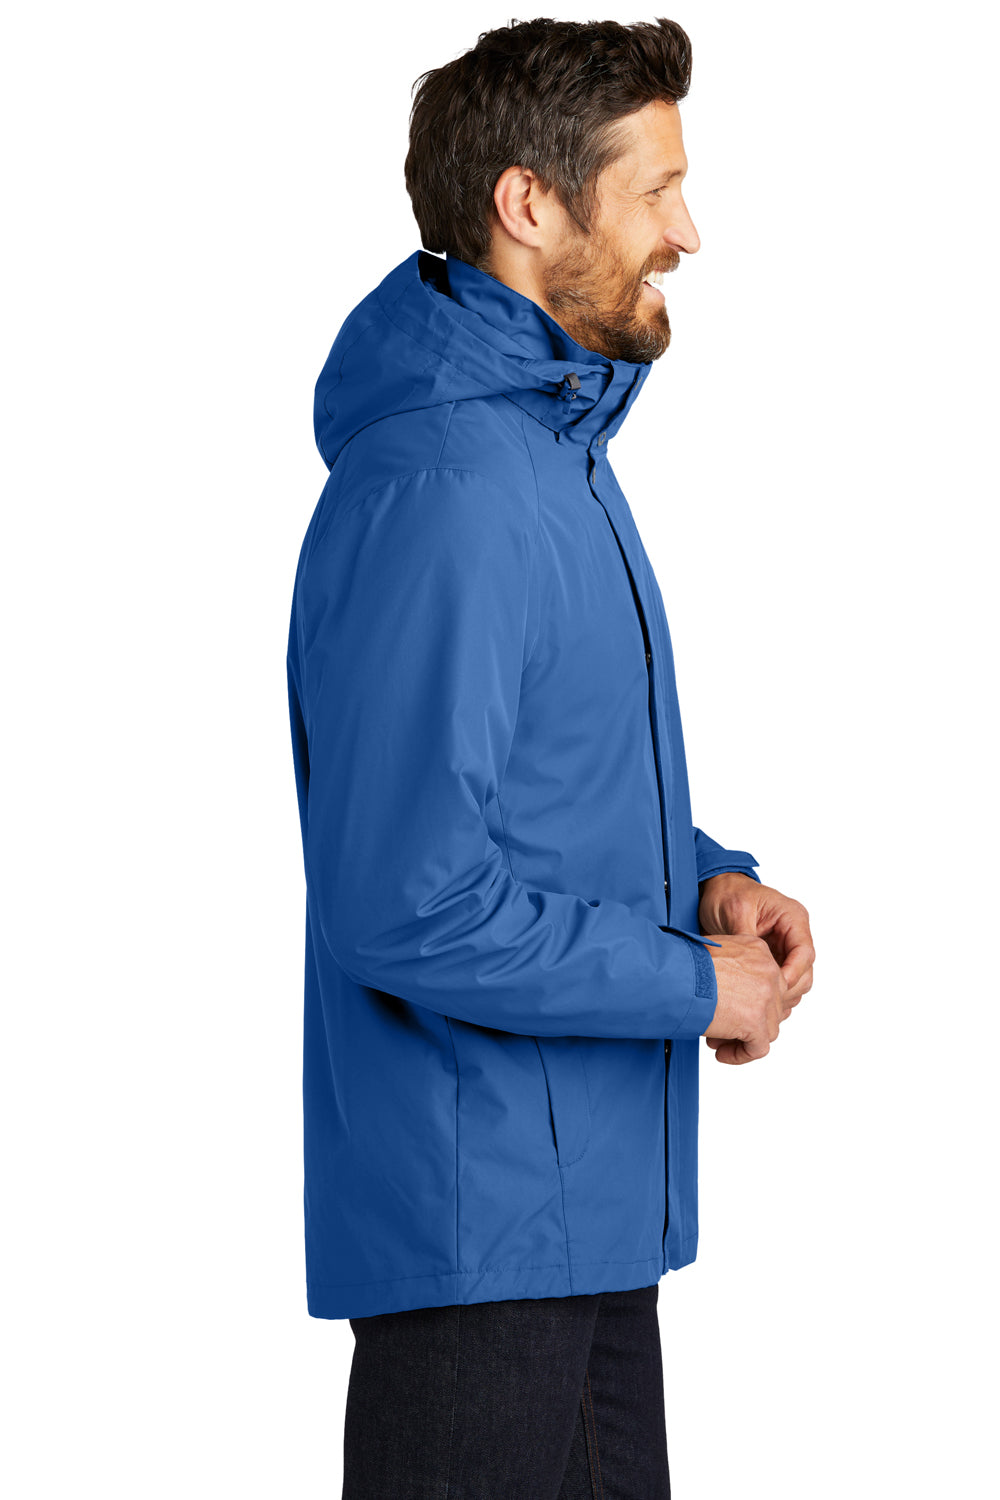 Port Authority J123 Mens All Weather 3 in 1 Full Zip Hooded Jacket True Blue Side